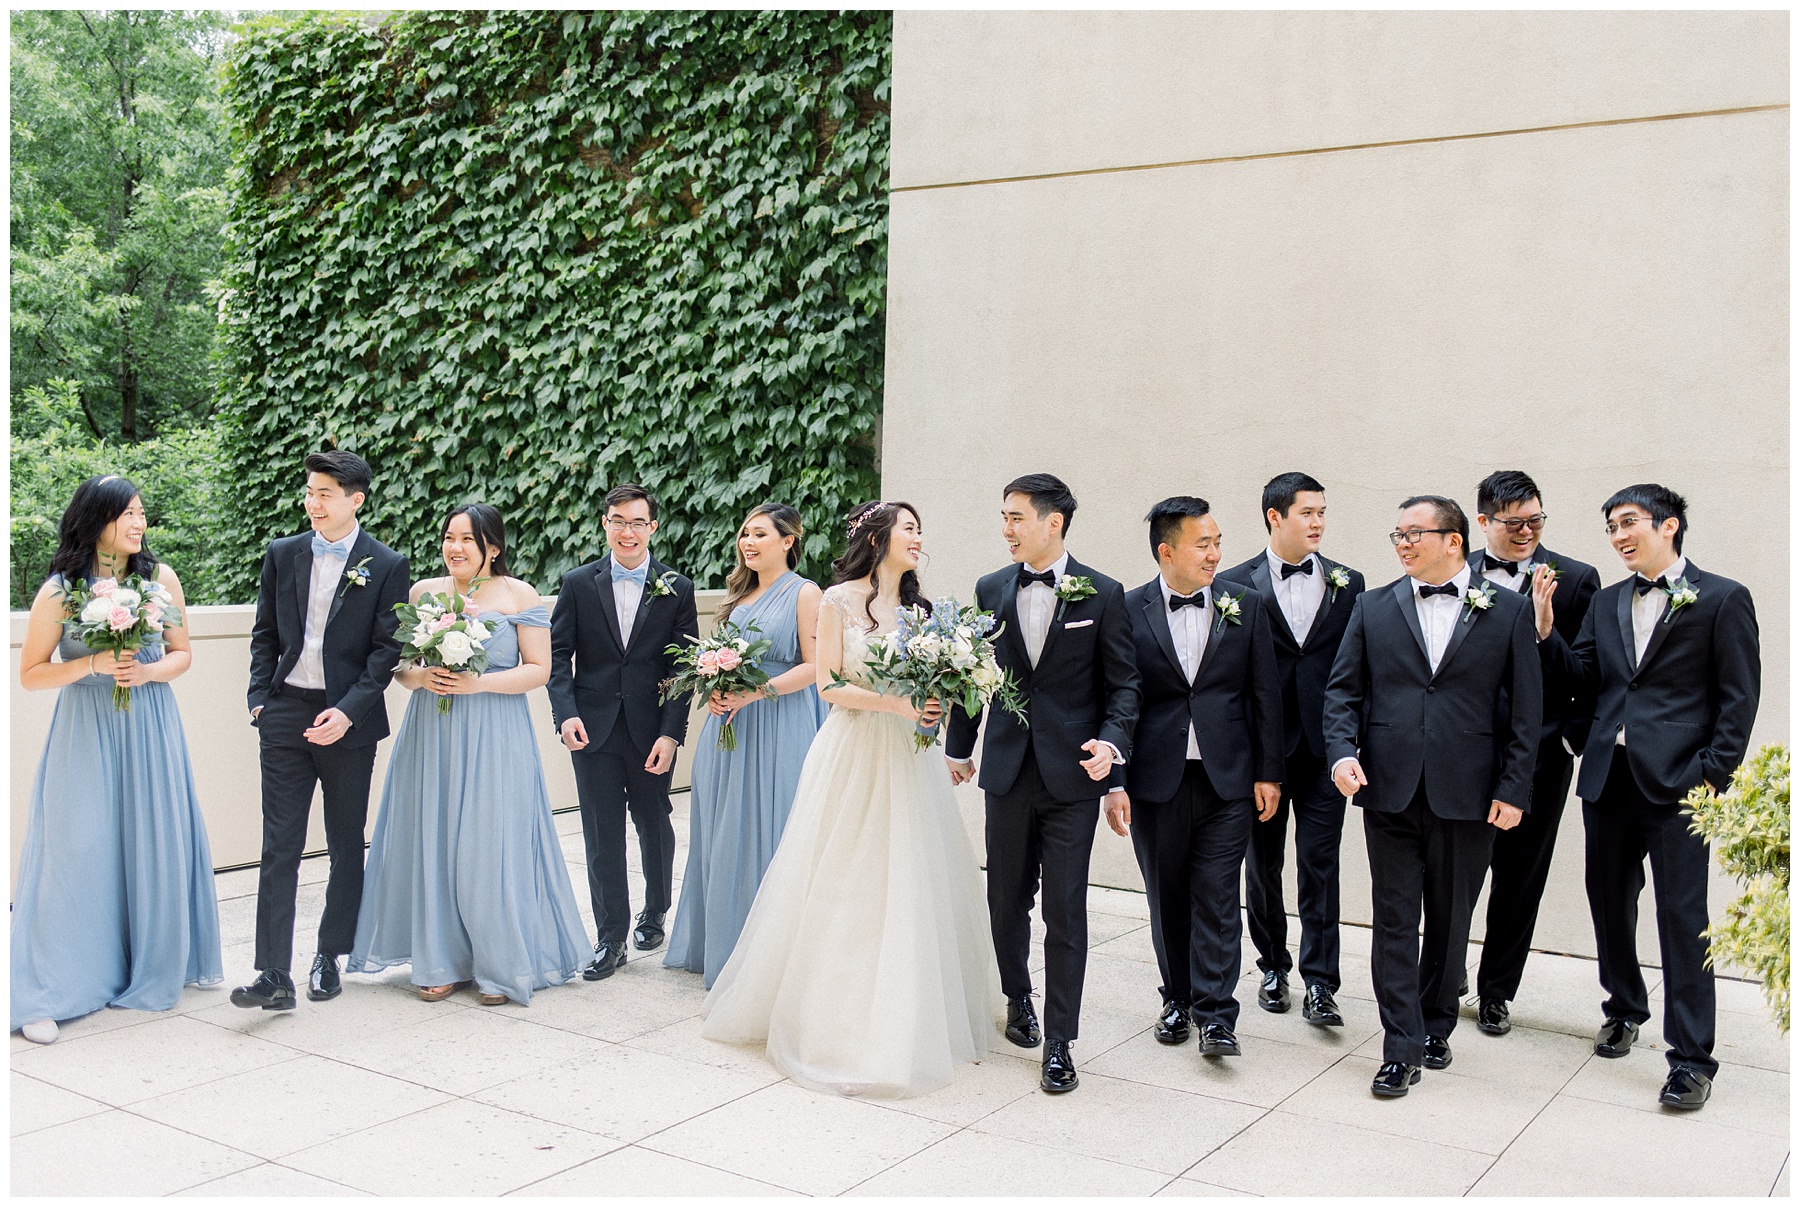 The Umstead Hotel and Spa Wedding in Cary NC